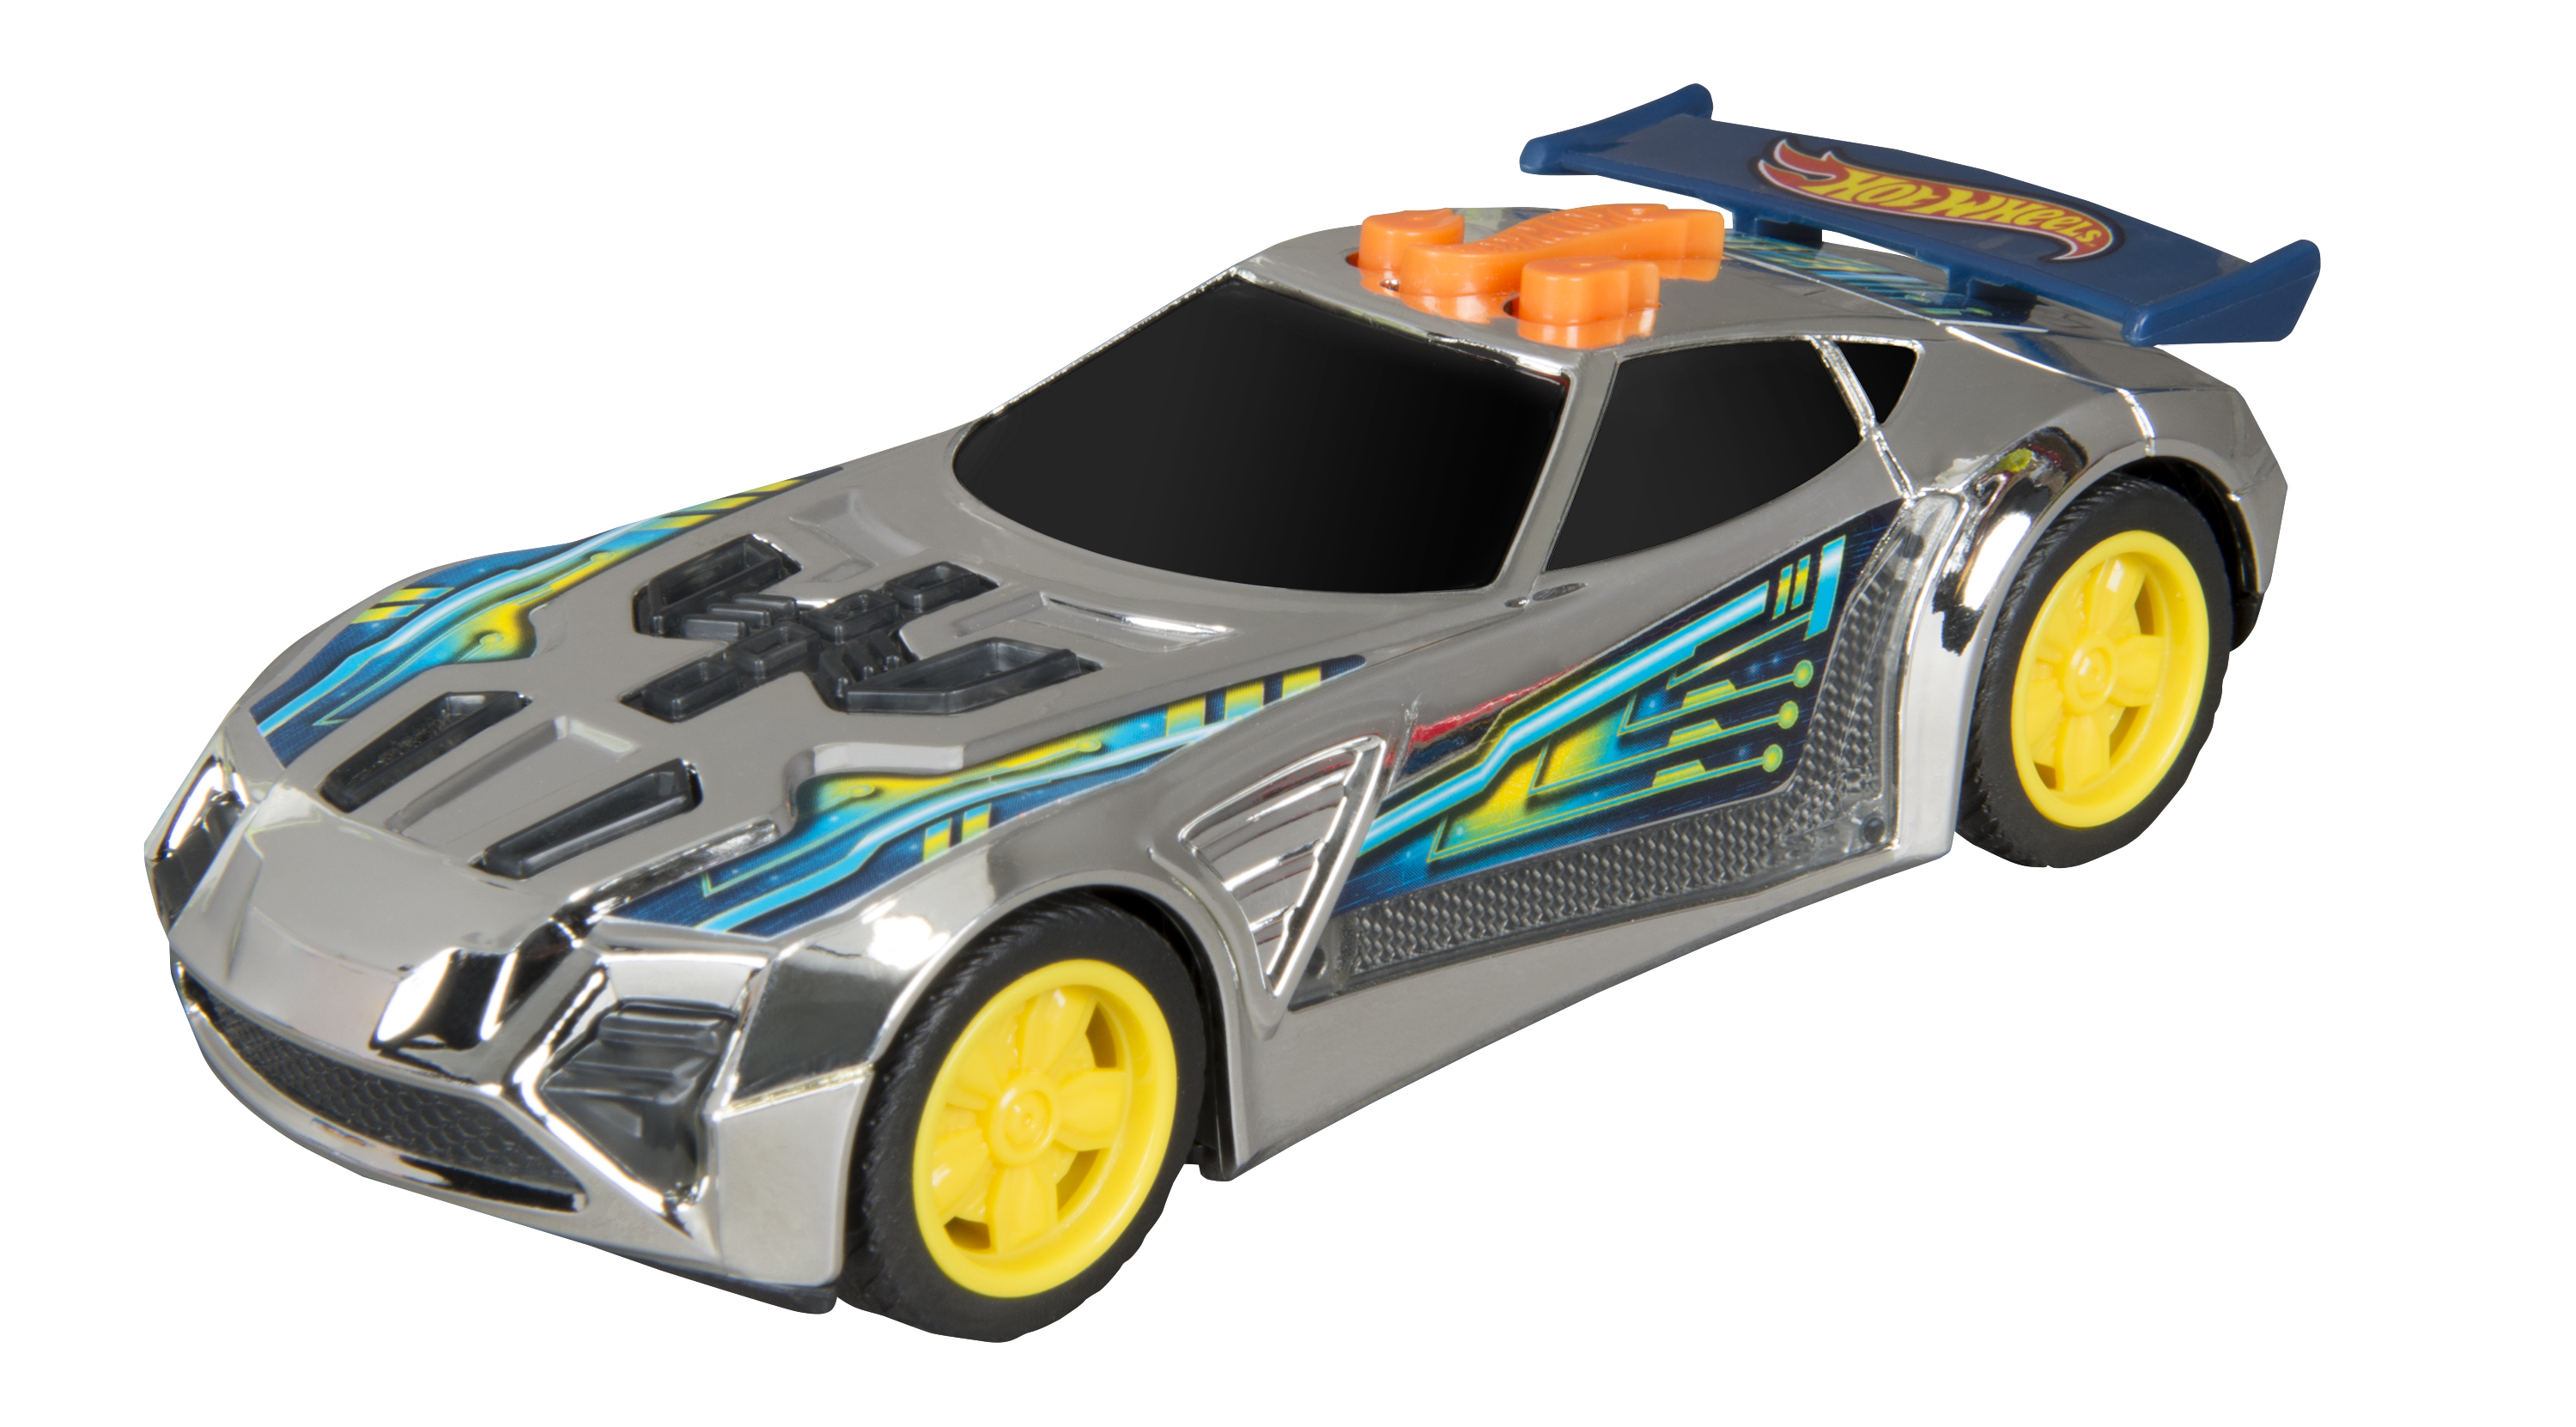 Hot Wheels Edge Glow Cruisers - Nerve Hammer with Lights and Sounds - image 1 of 4